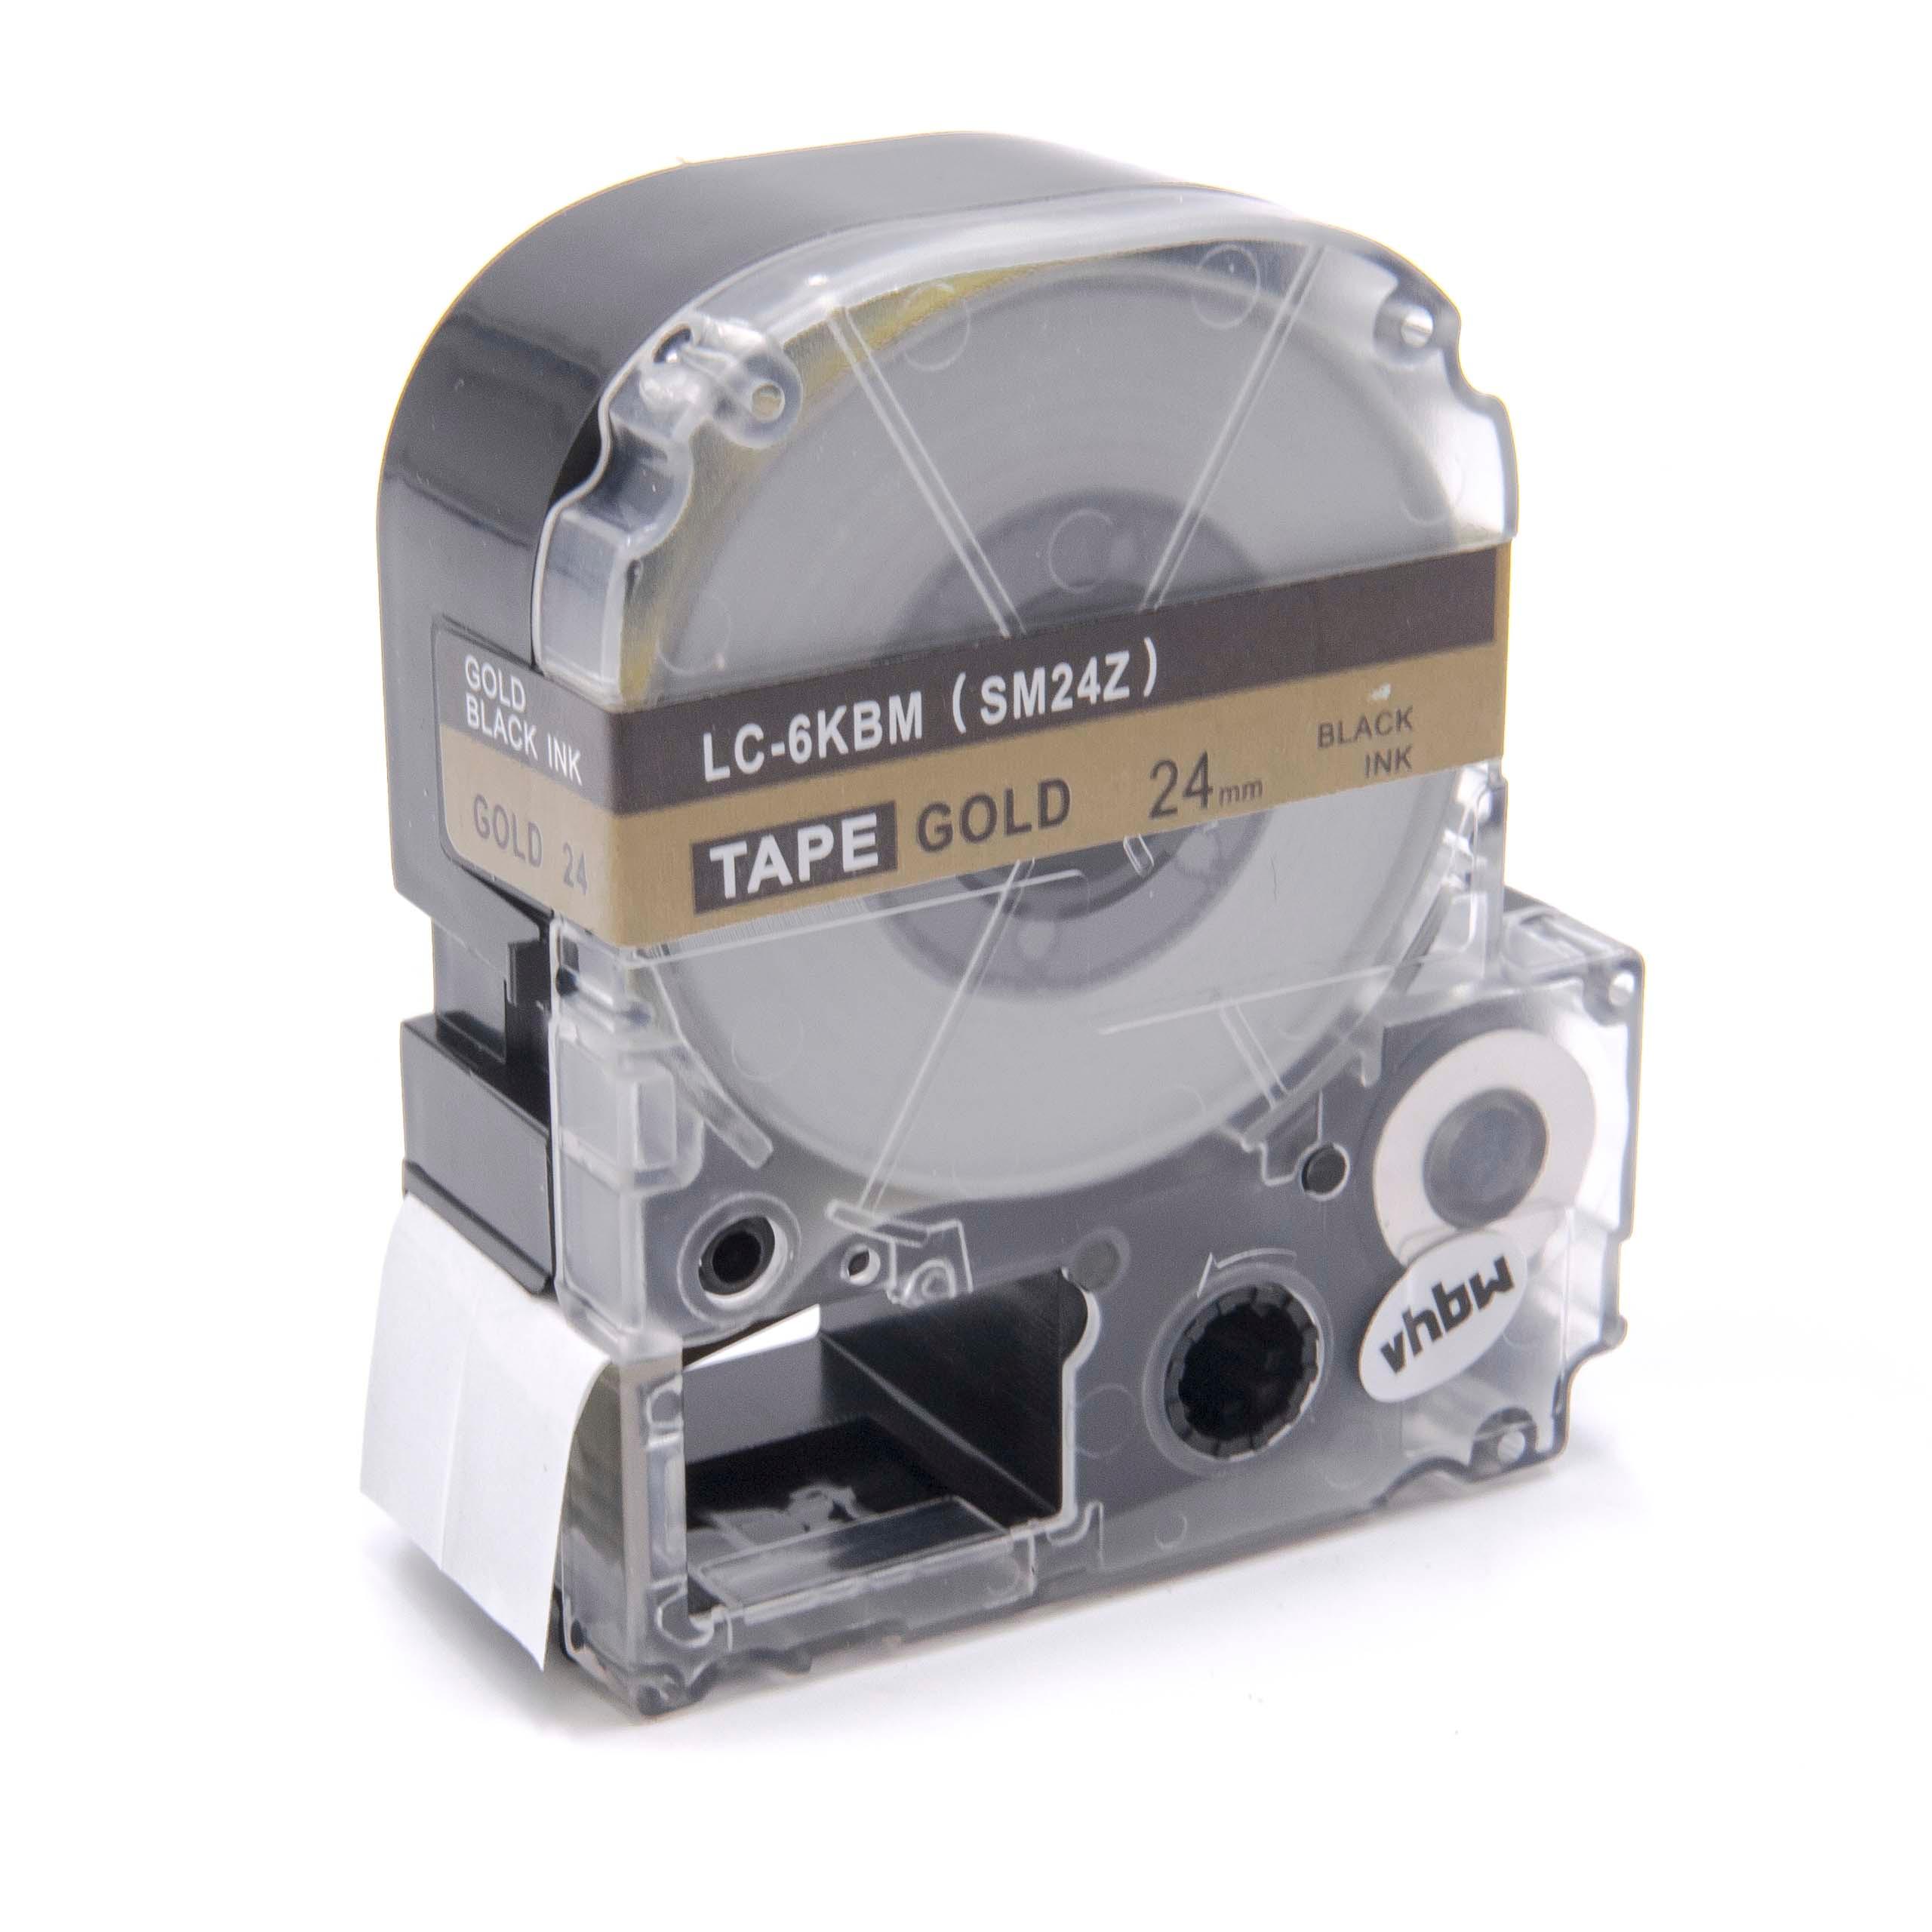 Label Tape as Replacement for Epson LC-6KBM - 24 mm Black to Gold